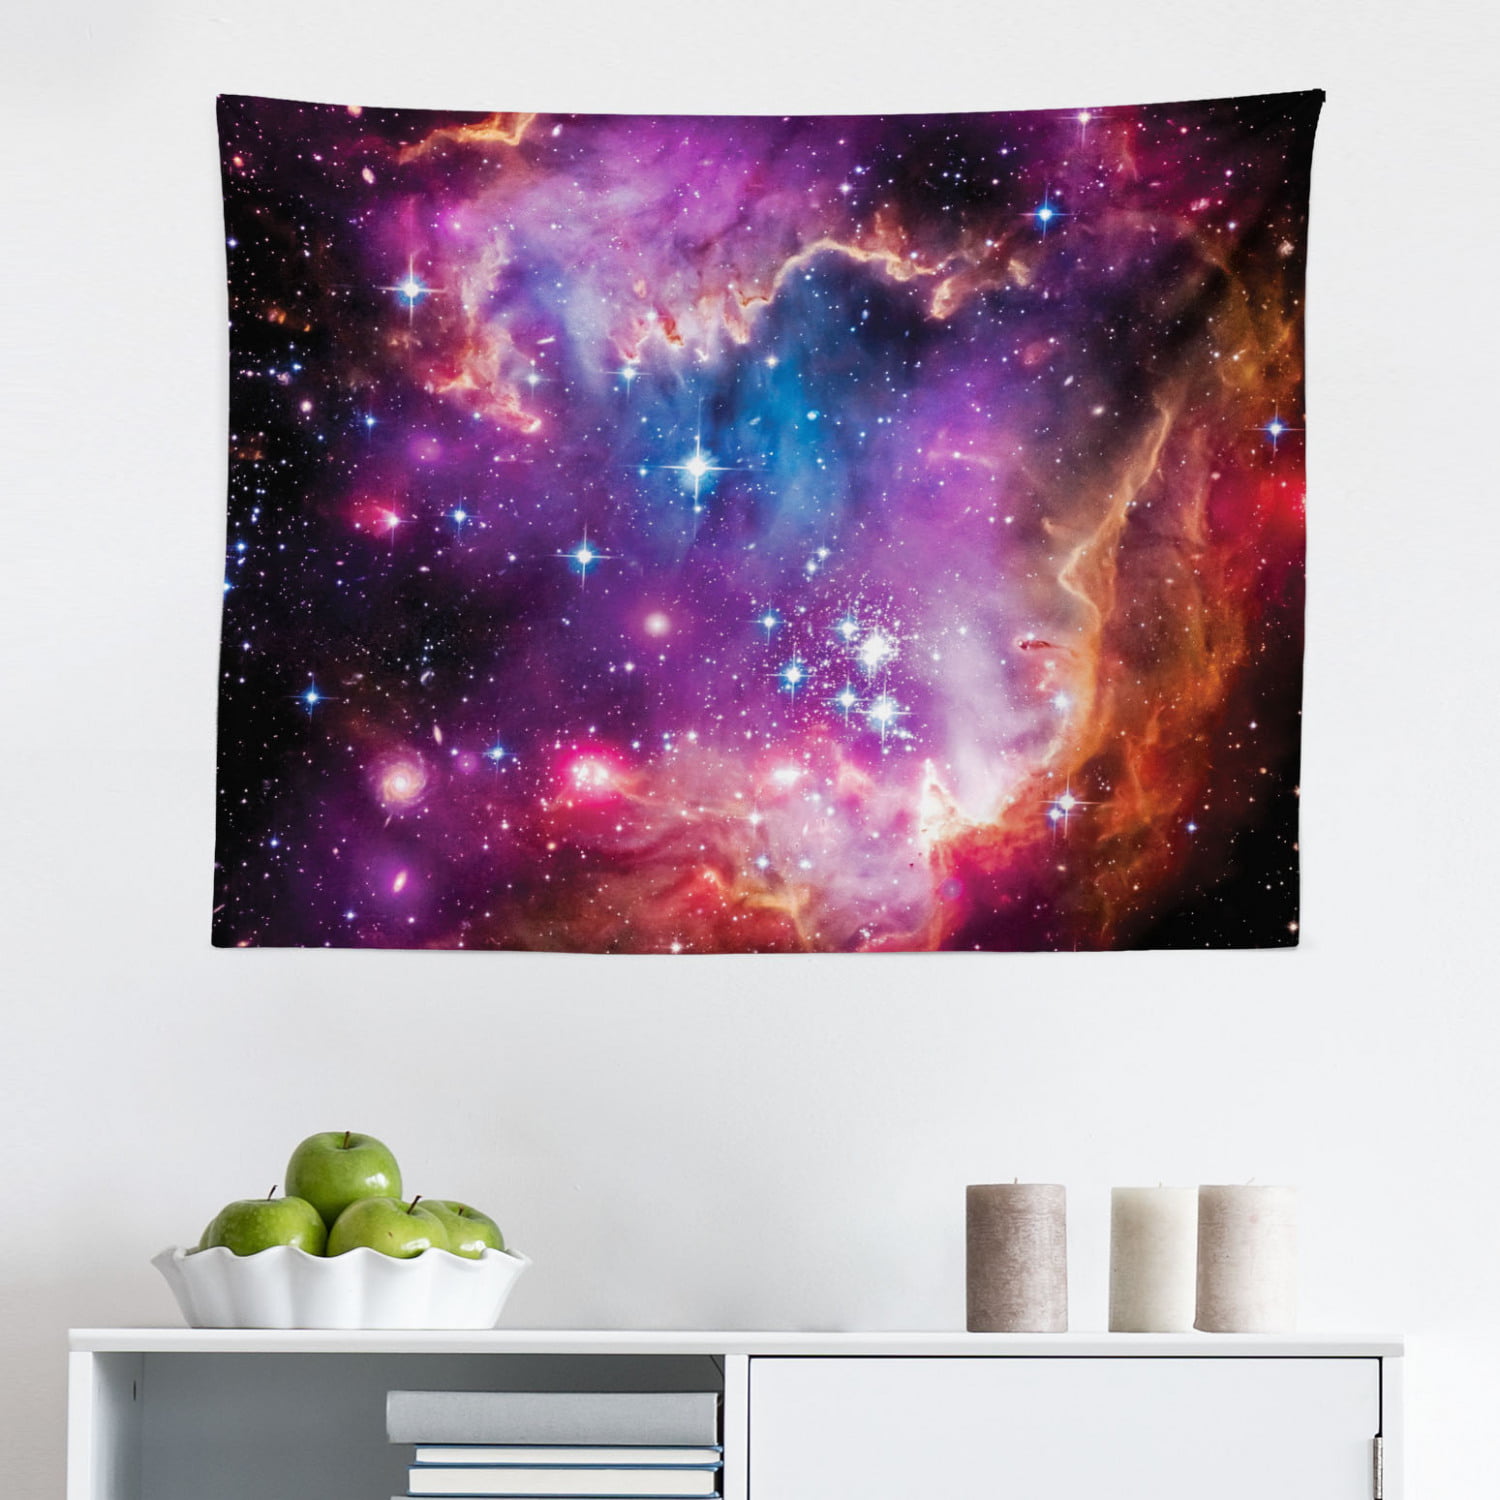 ABAKUHAUS Galaxy Tapestry Magellanic Cloud Stars And Colorful Fantastic Cosmic Universe View Pattern 58 W X 43 L Purple Blue Orange Fabric Wall Hanging Decor for Bedroom Living Room Dorm